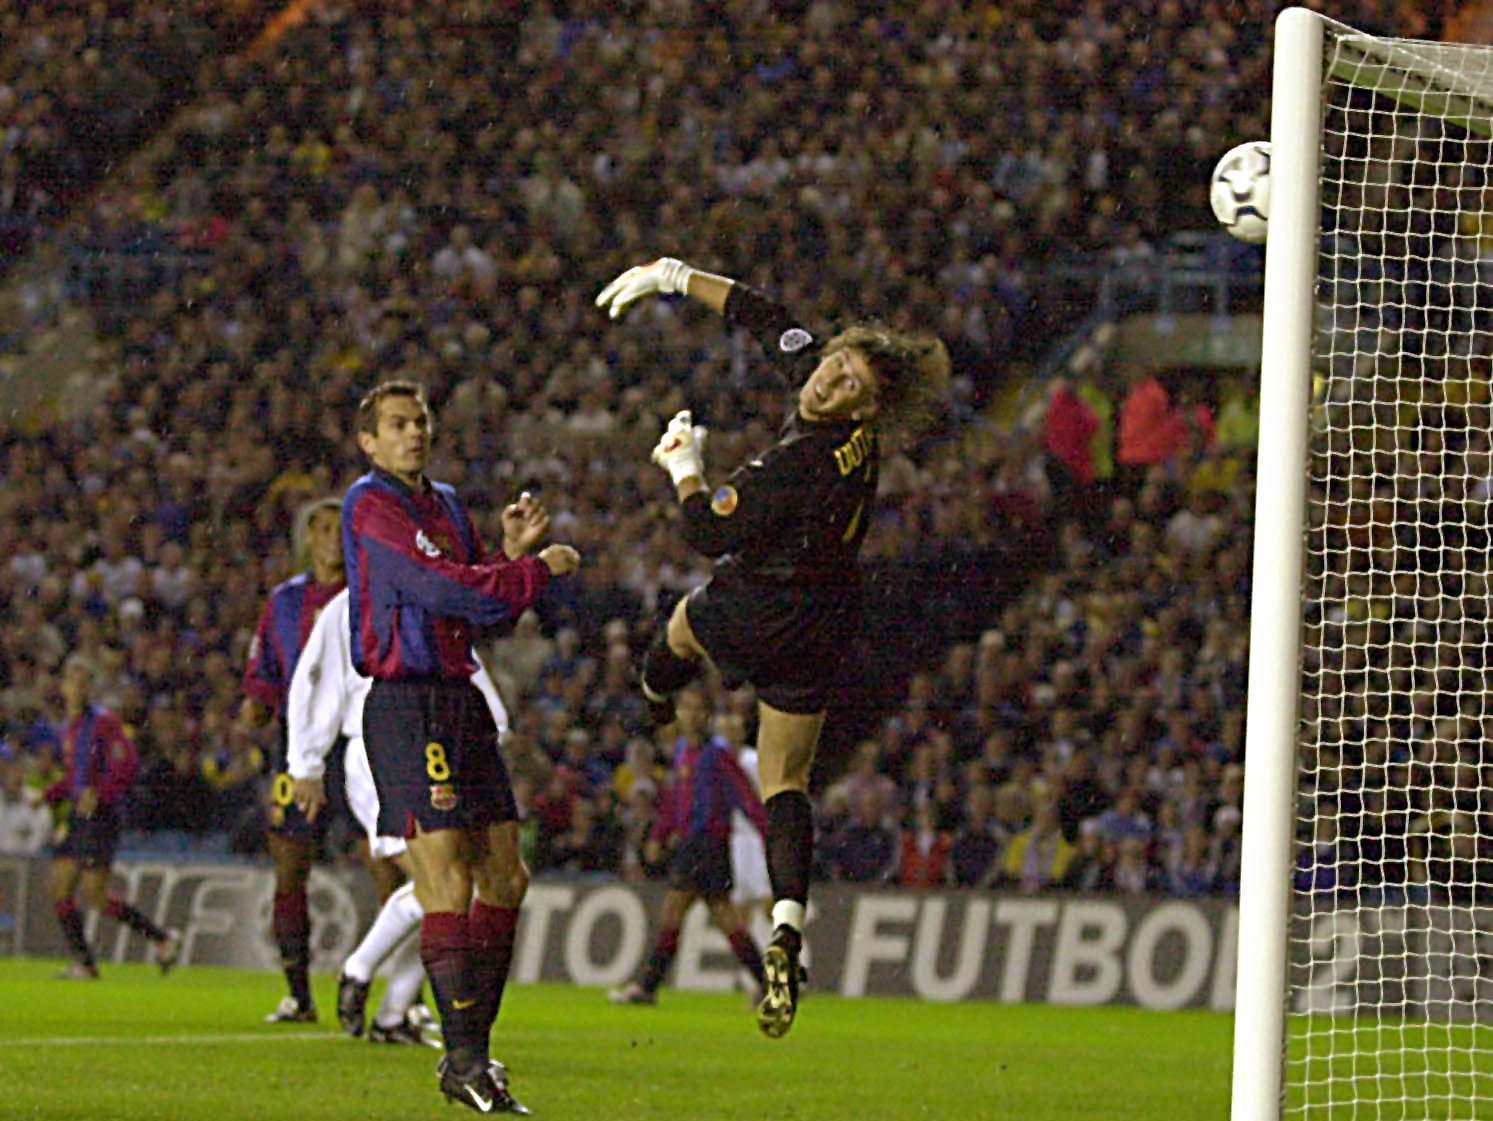 Leeds came within 10 seconds of securing their place in the second phase of the Champions League and sending Barcelona crashing out. It took a goal from Rivaldo deep into stoppage time to deny the Whites after Lee Bowyer had scored